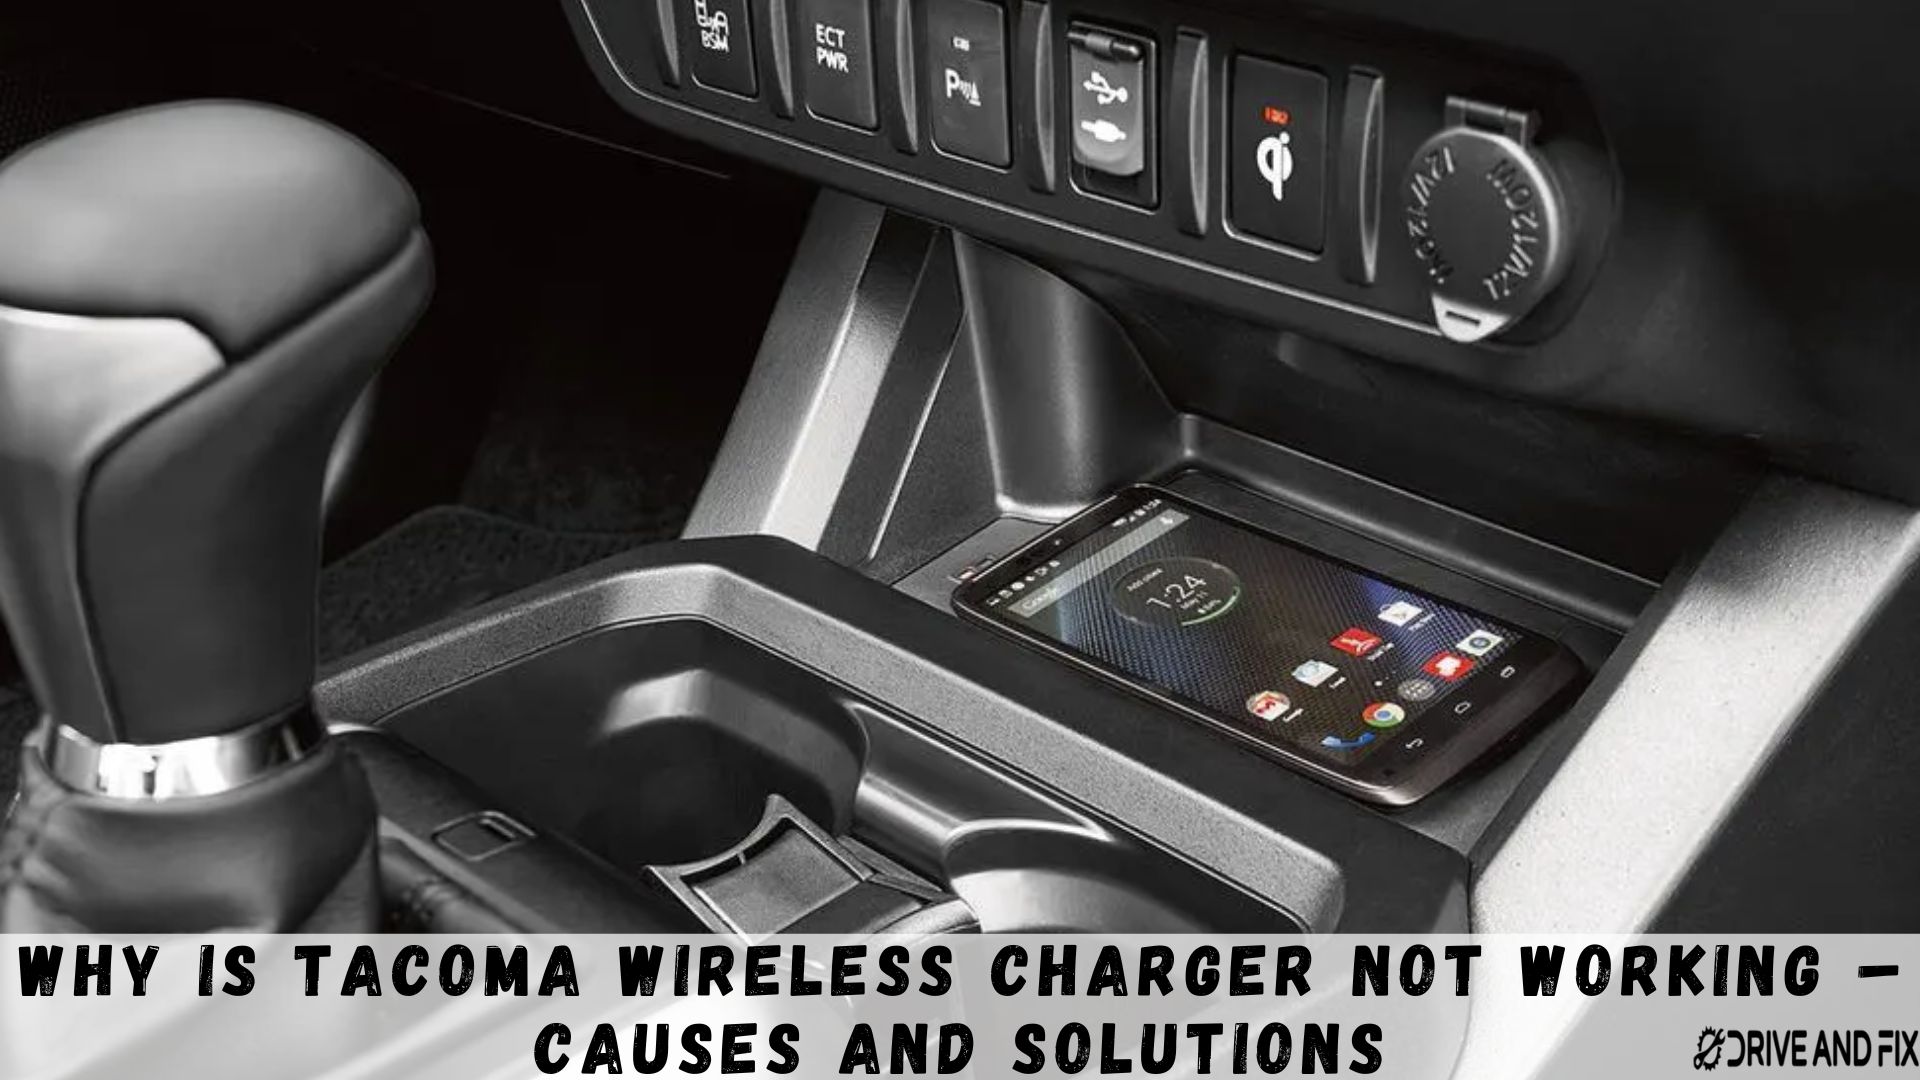 Why Is Tacoma Wireless Charger Not Working – Causes and Solutions